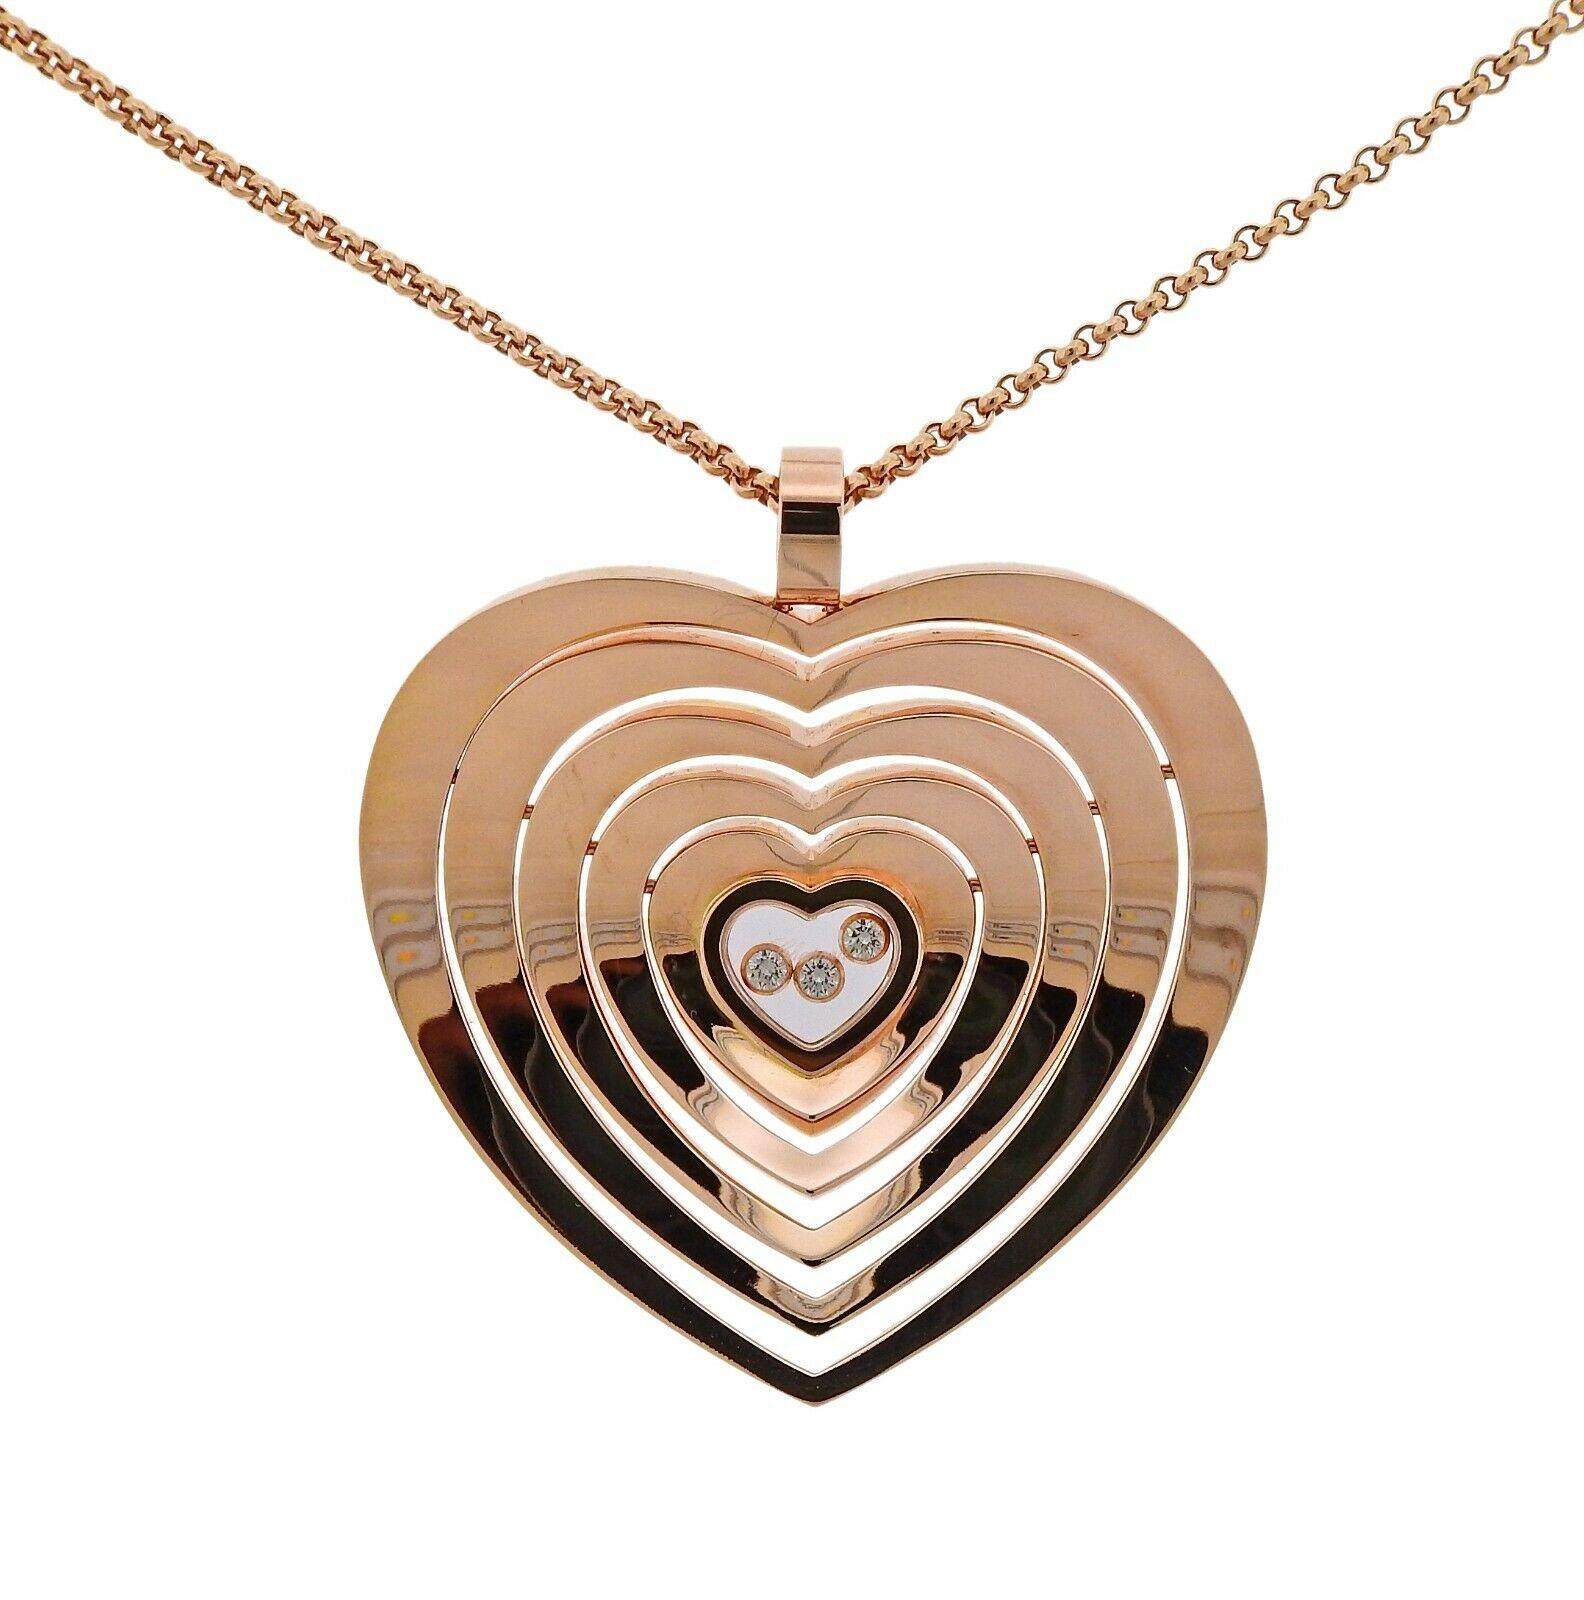 Chopard Happy Heart pendant necklace, featuring approx. 0.15ctw FG/VVS floating diamonds and movable pendant elements. Necklace is 24